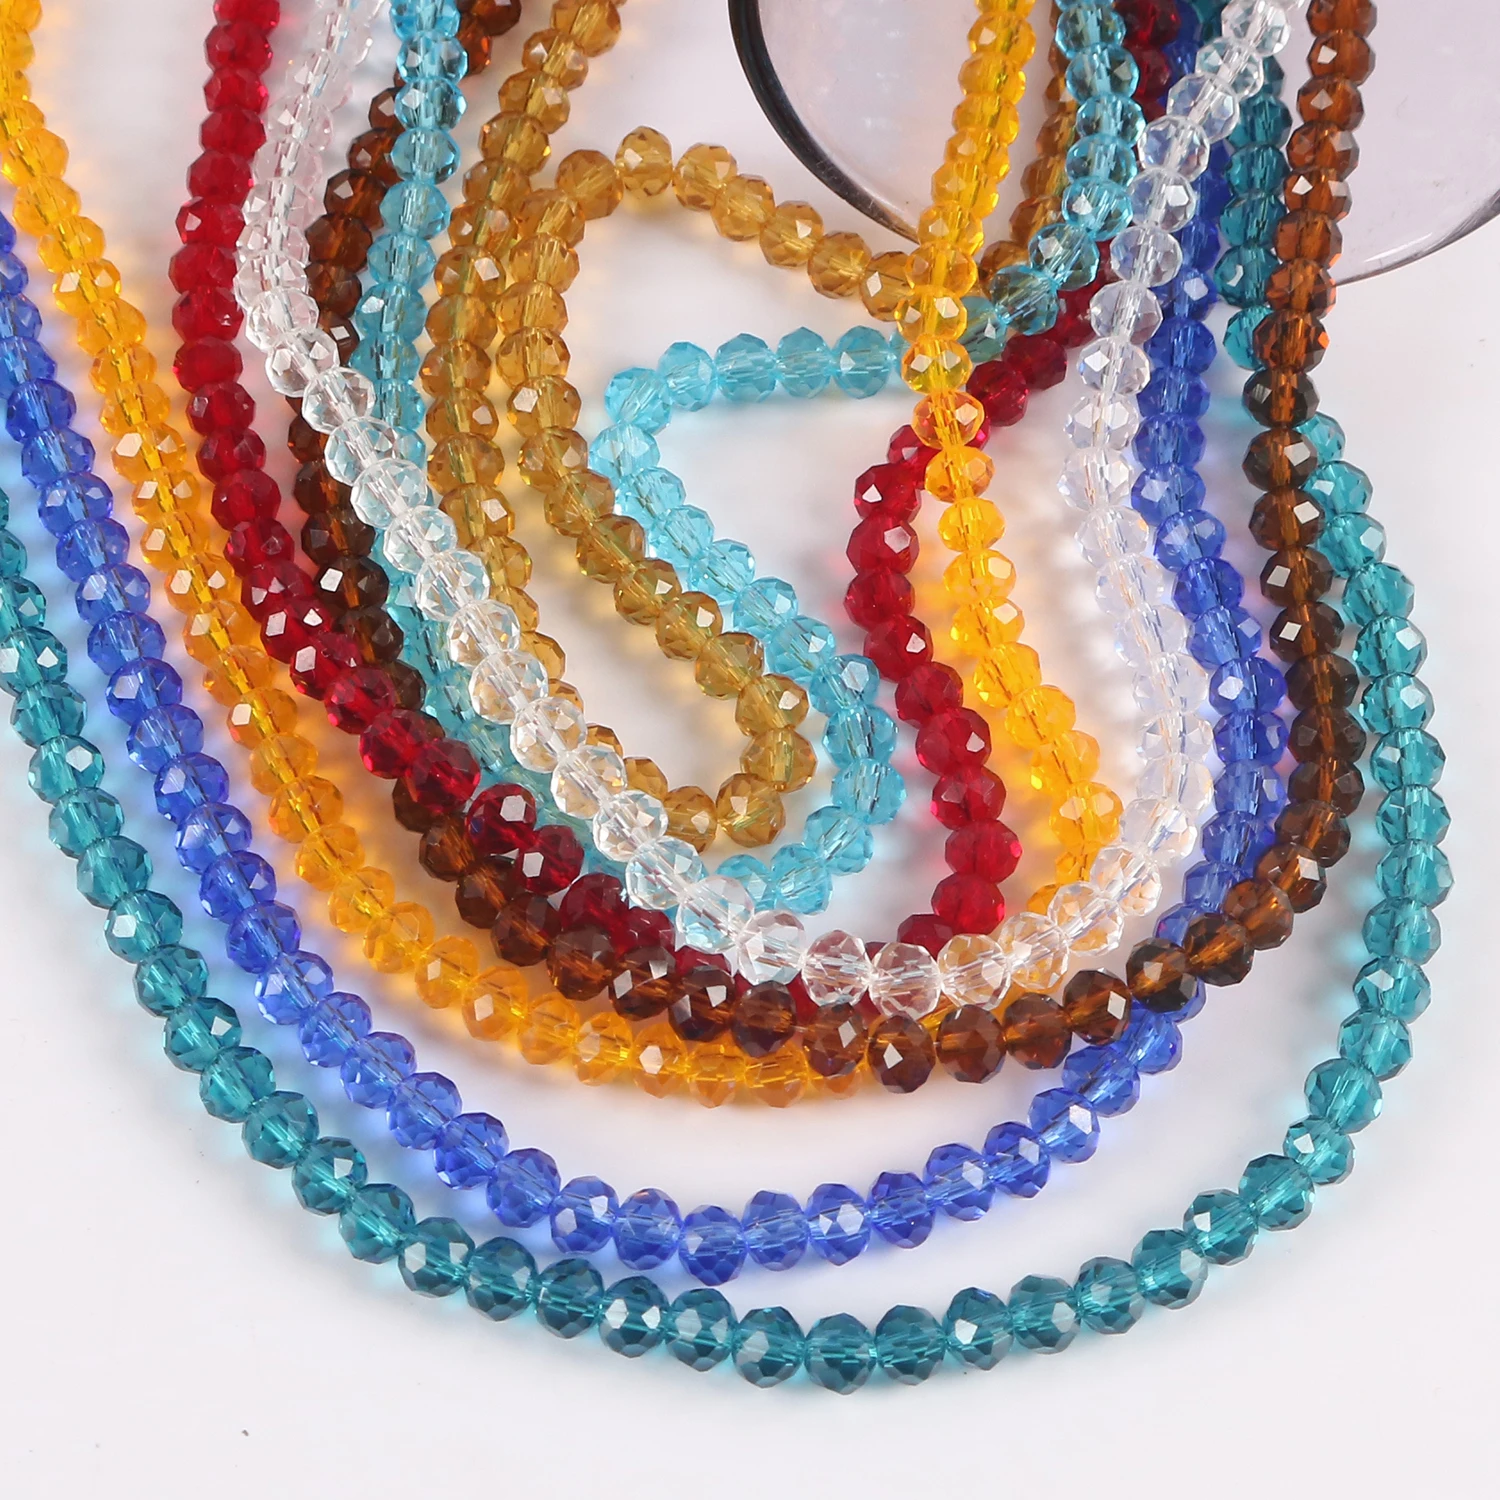 4mm 6mm 8mm Glass Beads Round Crystal Beads Colorful AB Spacer Bead  Rhinestone For Bracelet Jewelry Making DIY